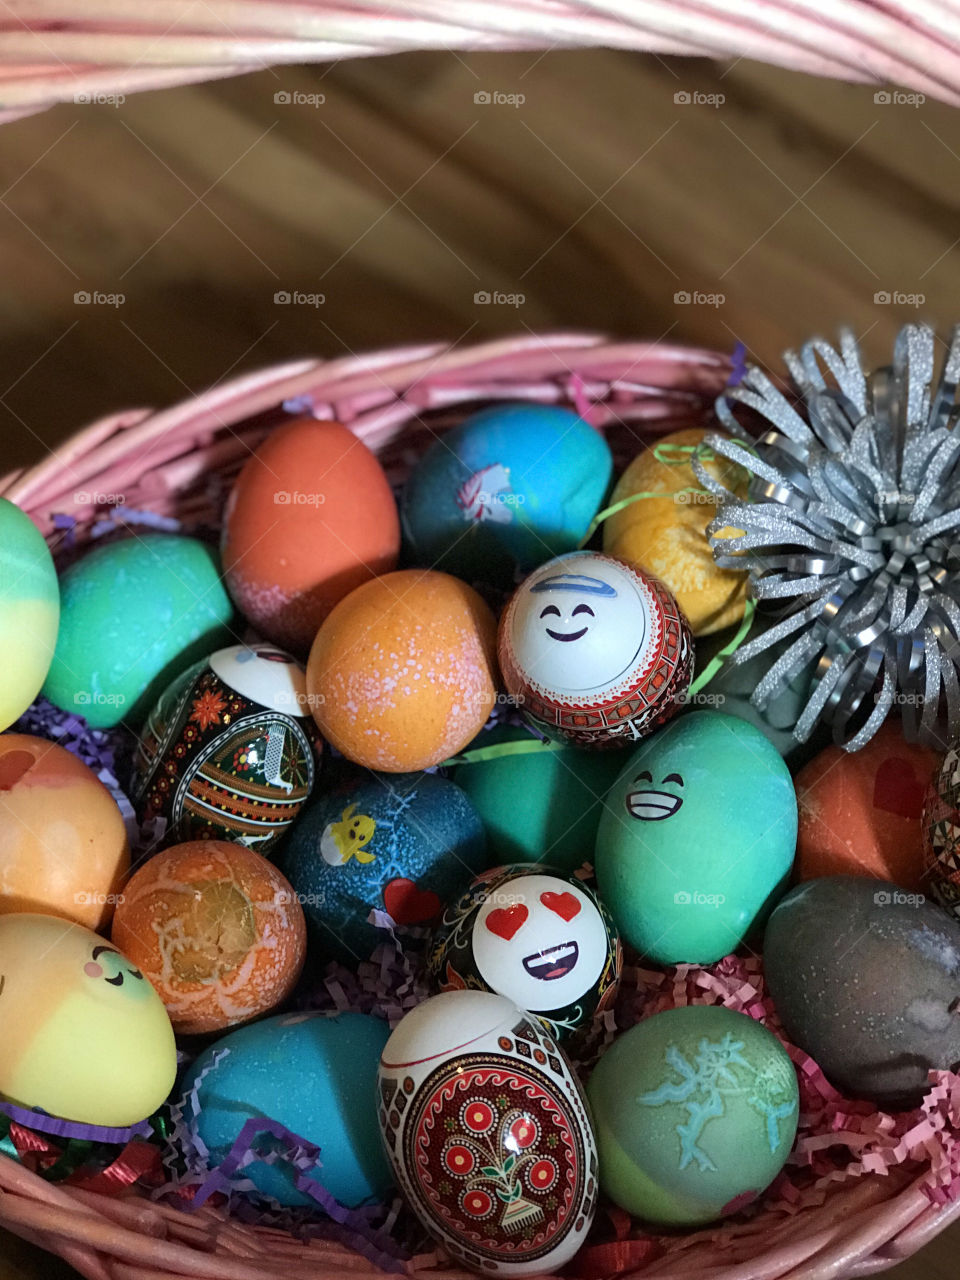 A pink wicker basketful of beautifully dyed and decorated eggs ‘eggs’pertly crafted by my daughters and niece while I was cooking an Easter feast! Great fun had by all!